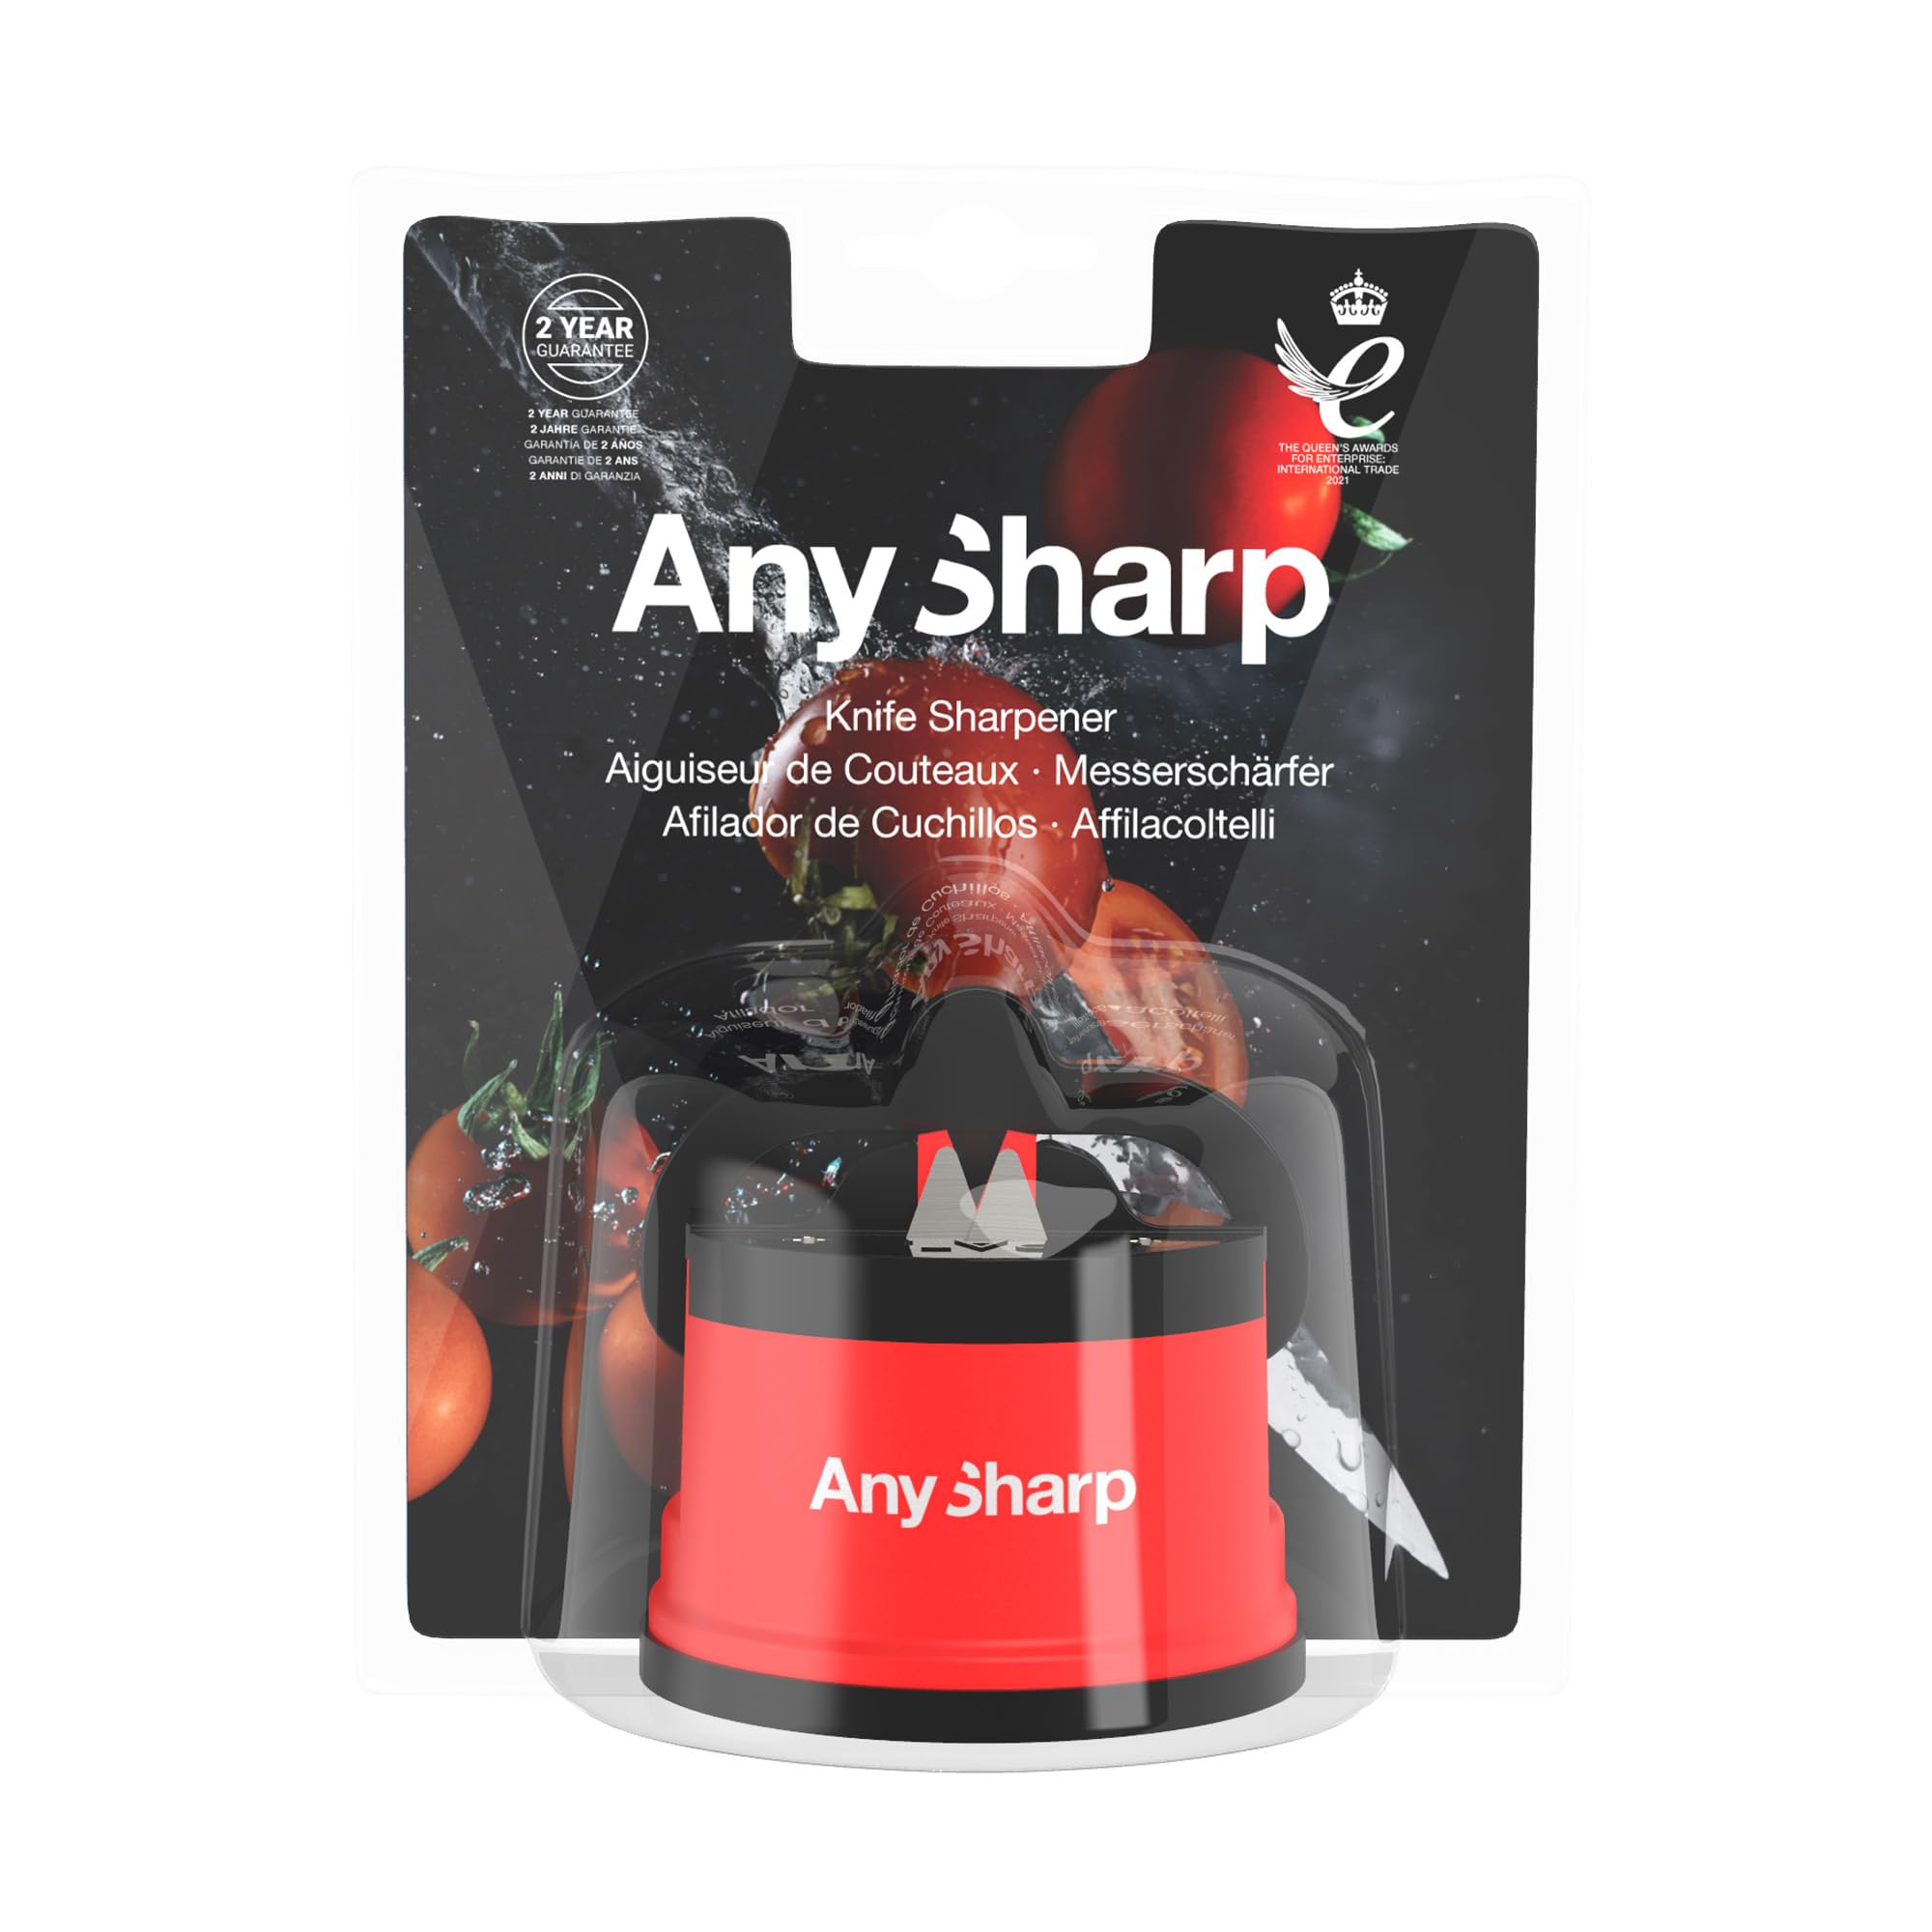 AnySharp Knife Sharpener, Hands-Free Safety, PowerGrip Suction, Safely Sharpens All Kitchen Knives, Ideal for Hardened Steel & Serrated, World's Best, Compact, One Size, Red